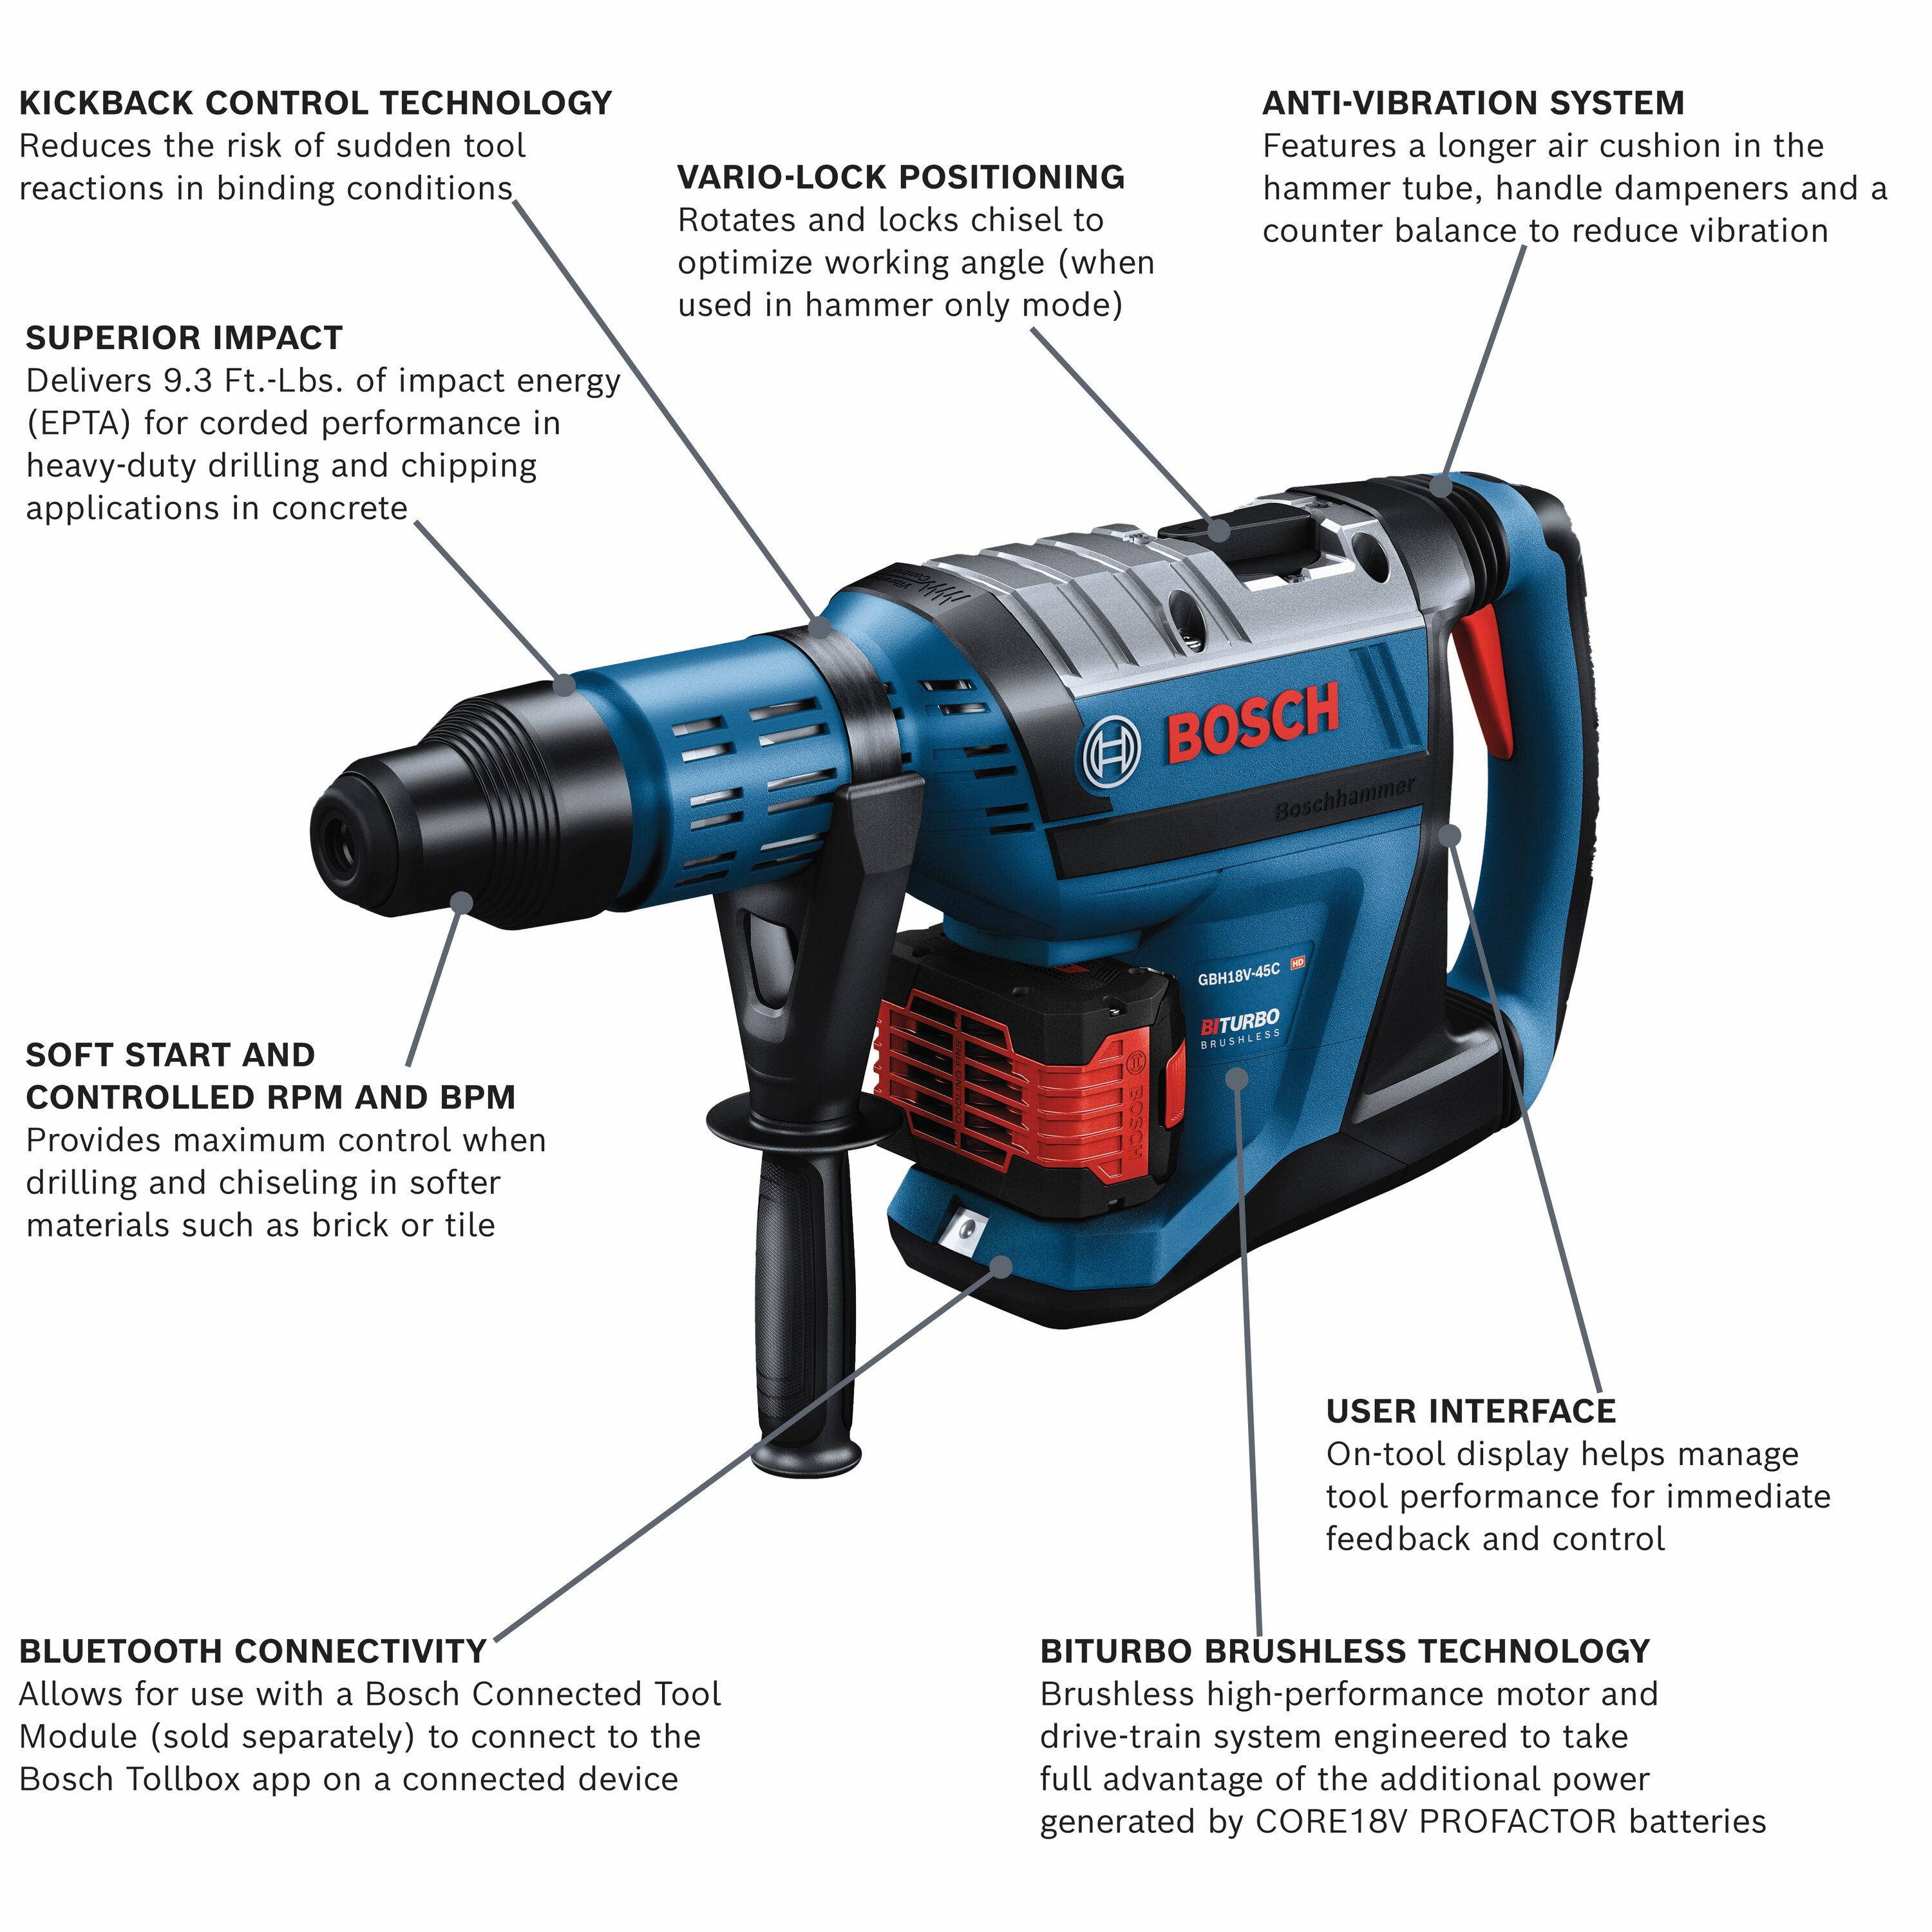 Bosch PROFACTOR 18-V 12 Amp-Hour; Lithium Battery in the Power